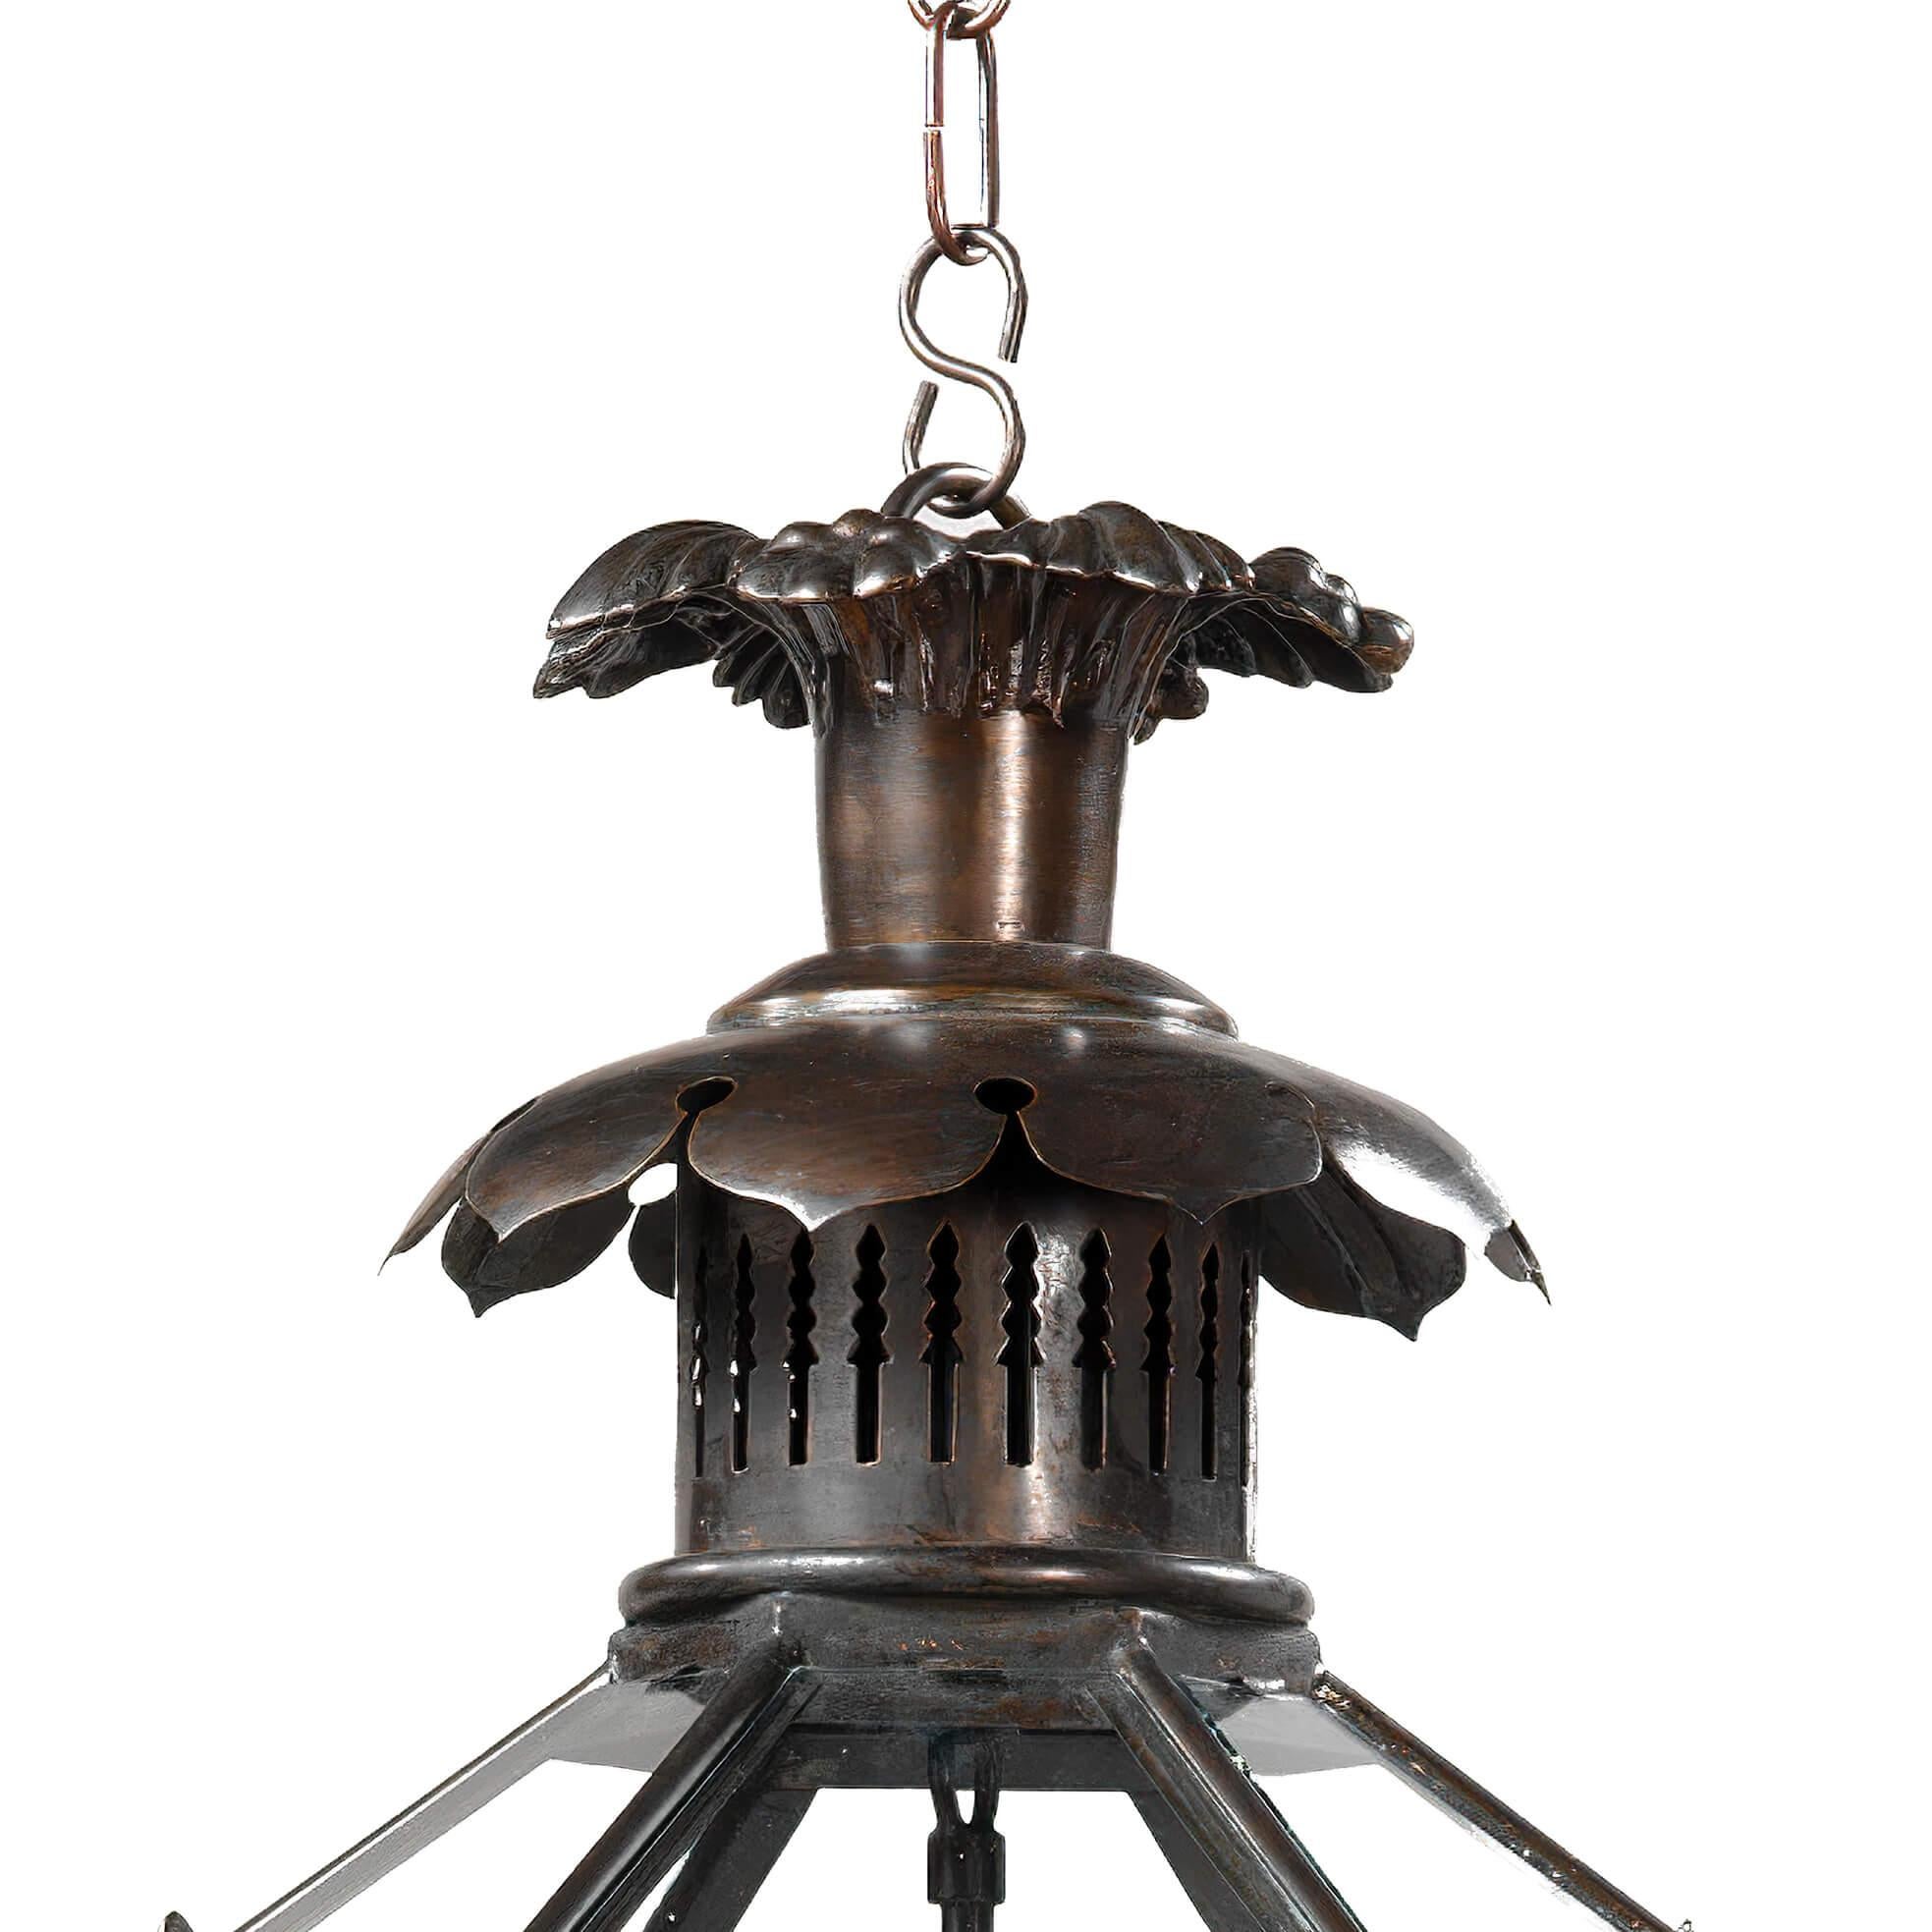 A traditional three-light English George II style hall lantern with a pagoda form crown, anthemion and scrollwork decoration above the hexagonal tapered frame with a reticulated upper section and door finished in an antiqued bronze.

Dimensions: